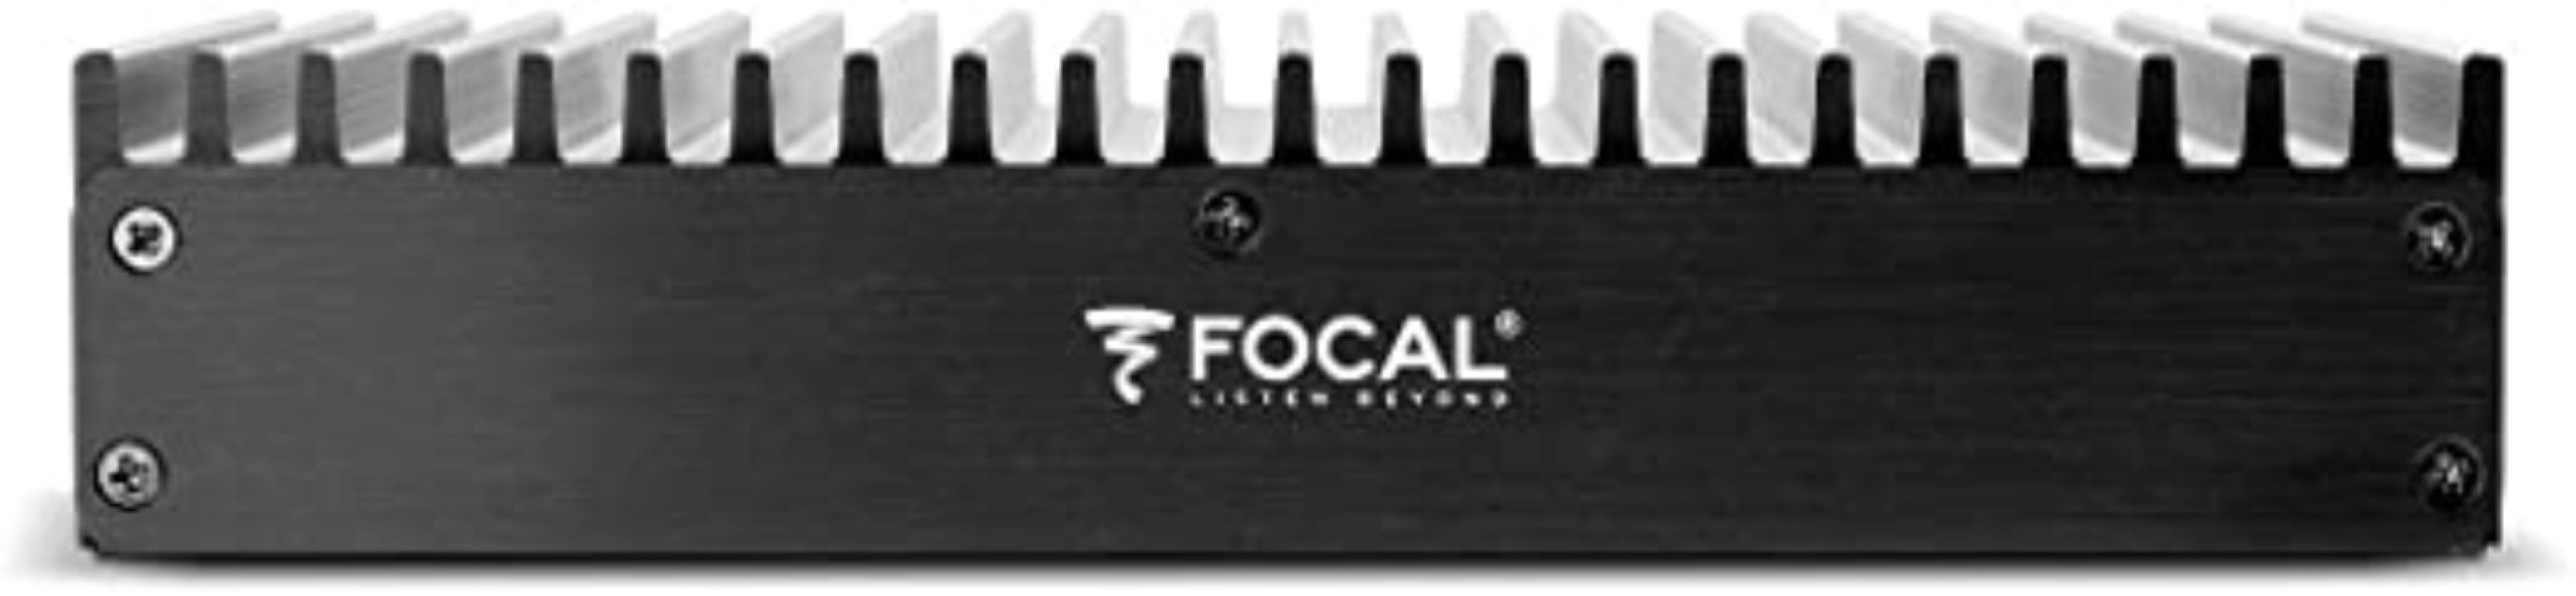 FOCAL FIT 9.660